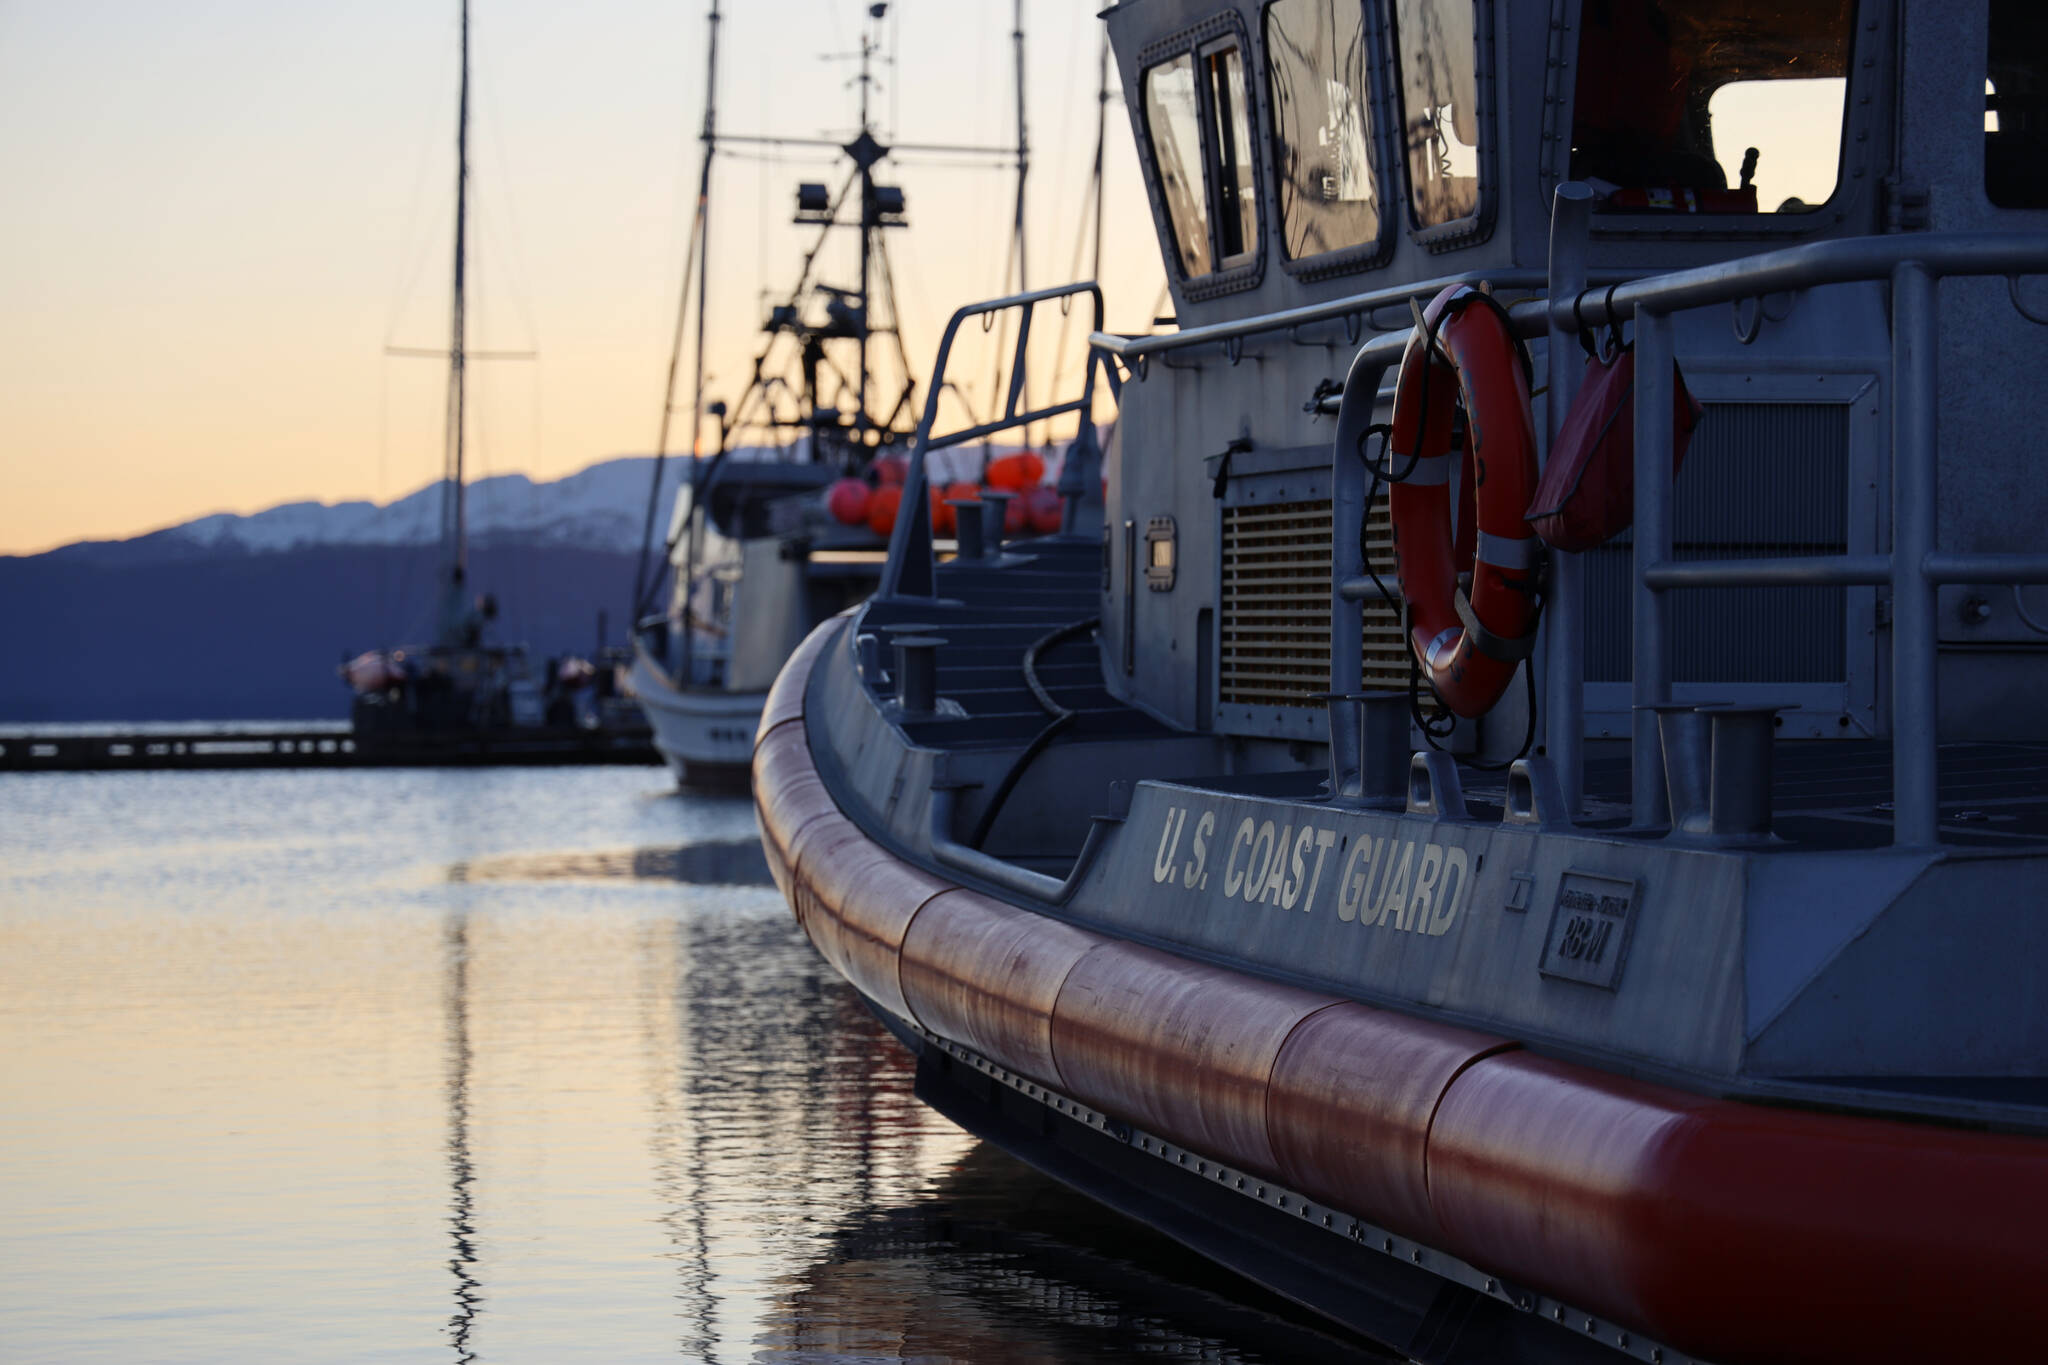 This photo shows a Coast Guard vessel moored in Auke Bay. Another vessel, an icebreaker, could soon be homeported in Juneau following passage of the NDAA. City officials are considering whether that developed should encourage the city to become involved with plans to develop a cruise ship dock on a waterfront property. (Clarise Larson / Juneau Empire)